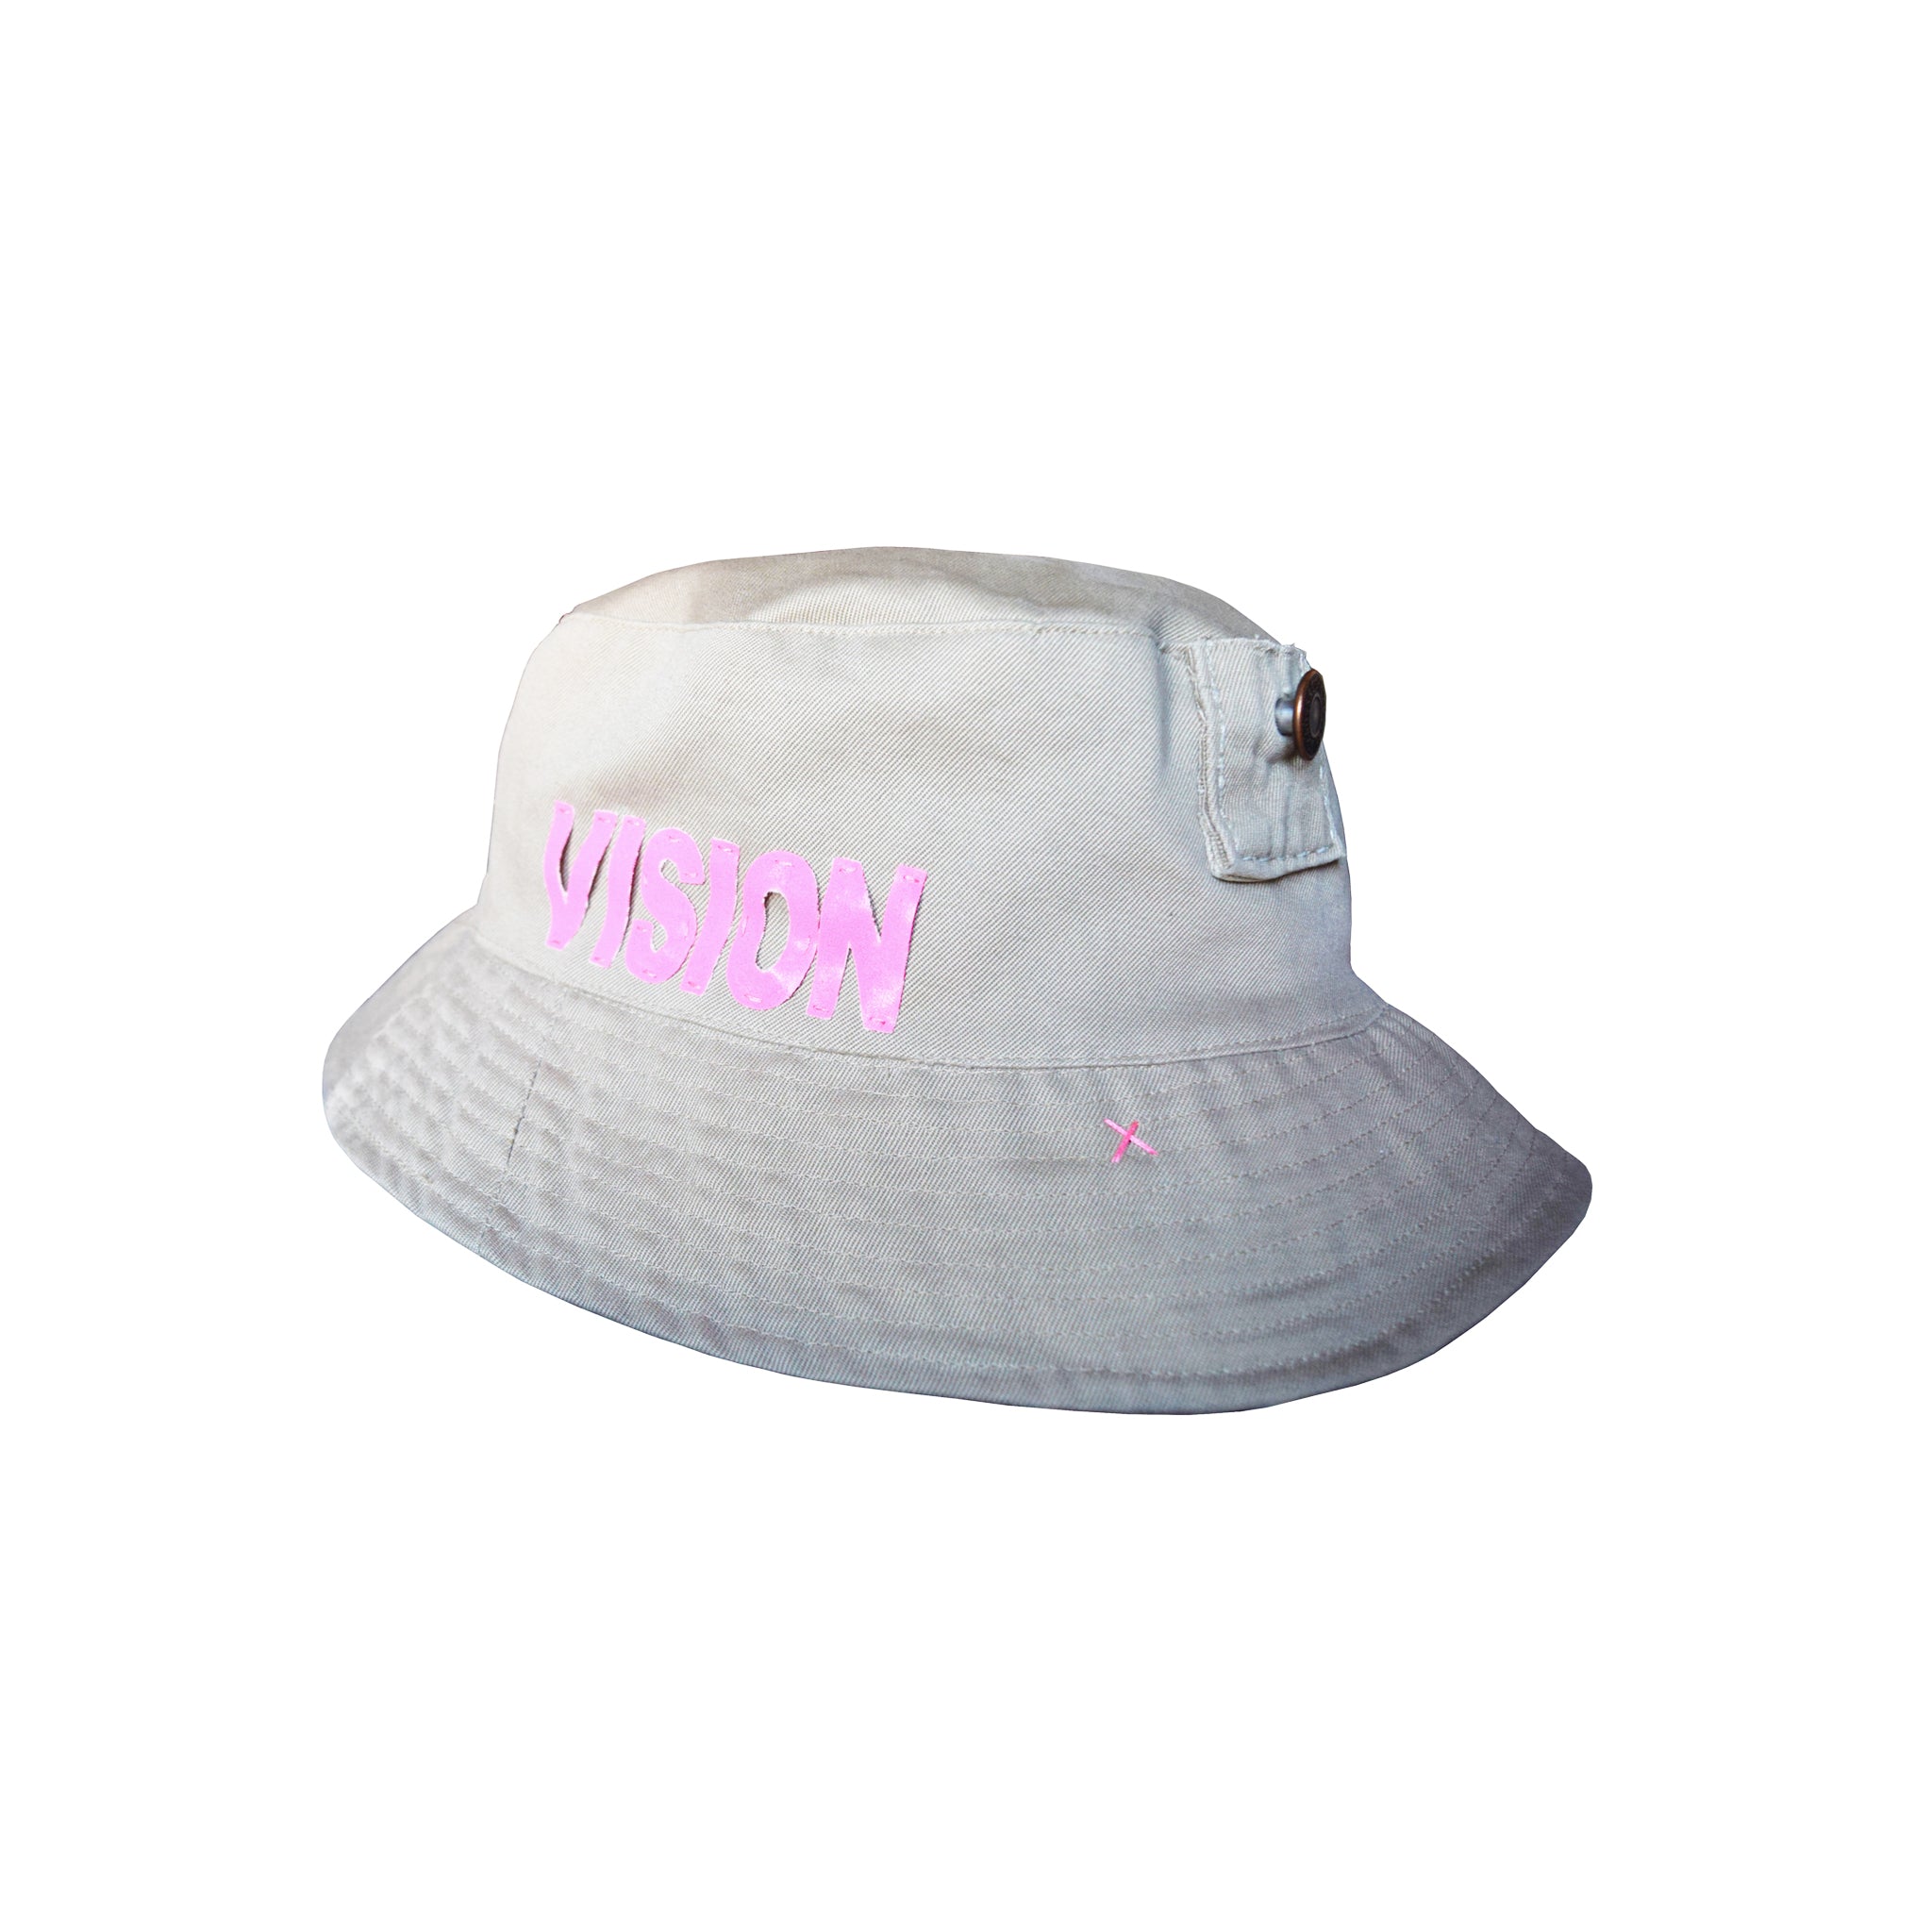 "RE-WORKED VISION" BUCKET HAT